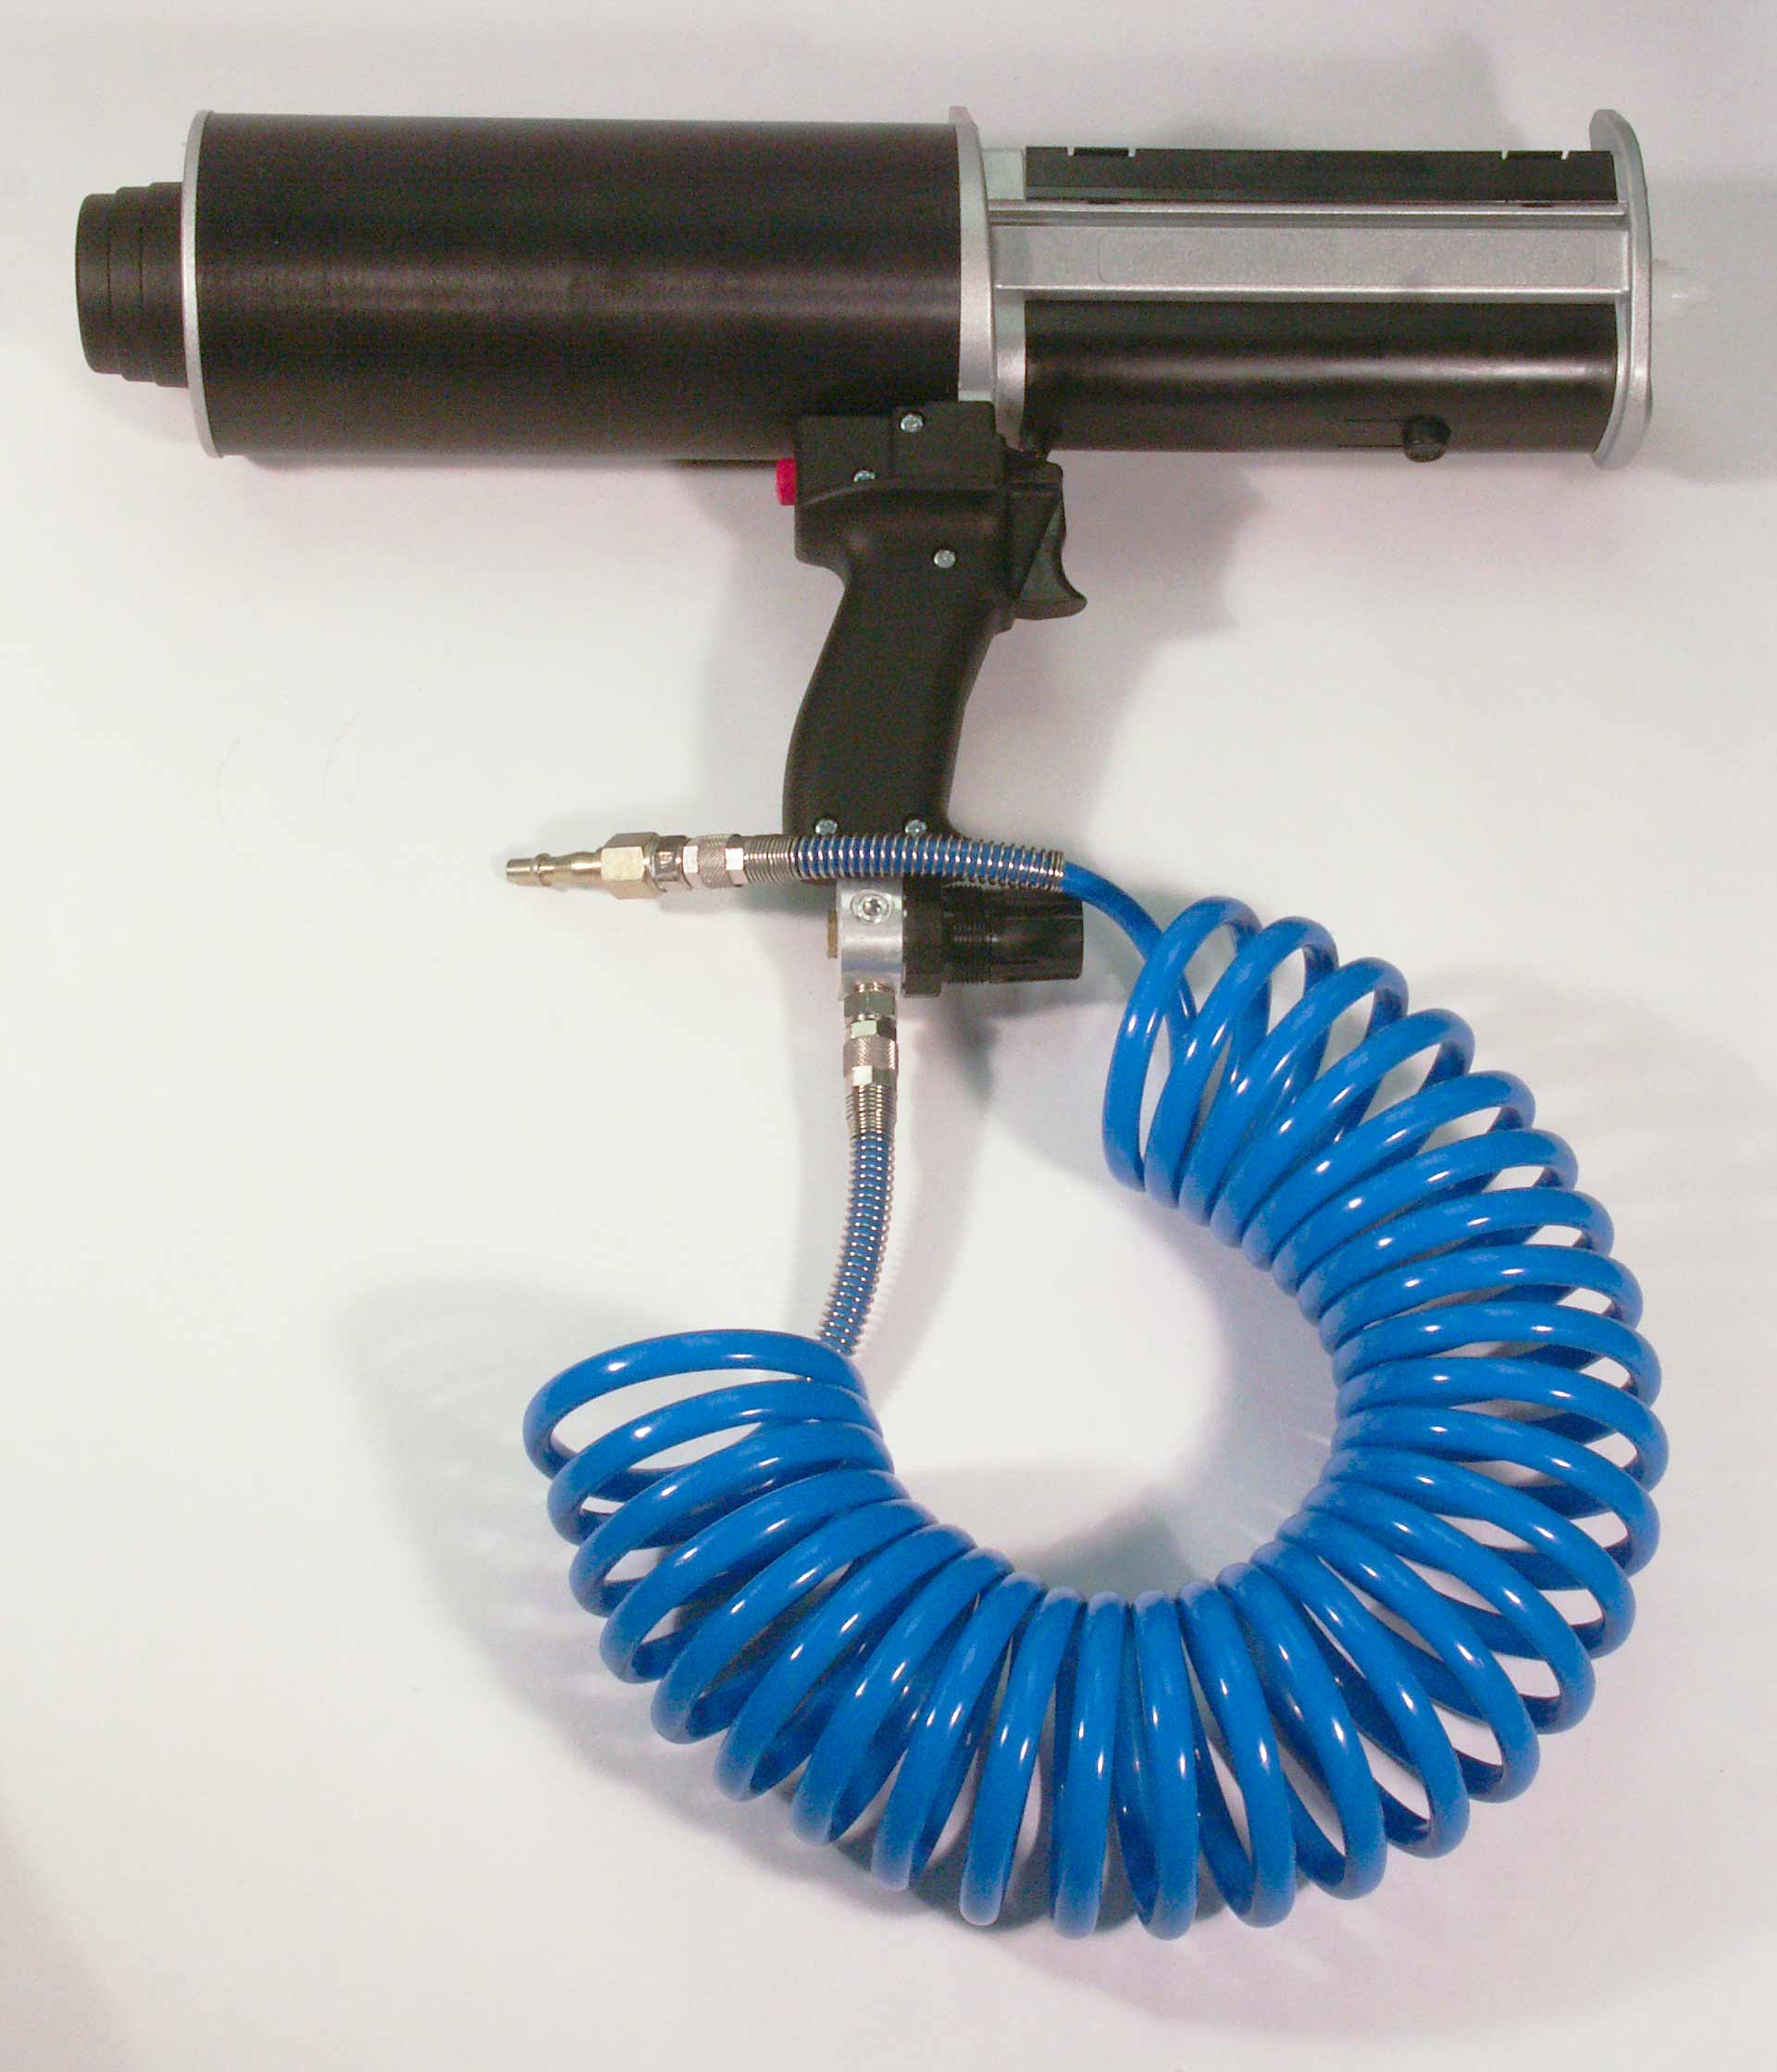 DP400 Pneumatic Dispensing Gun with the airline attached